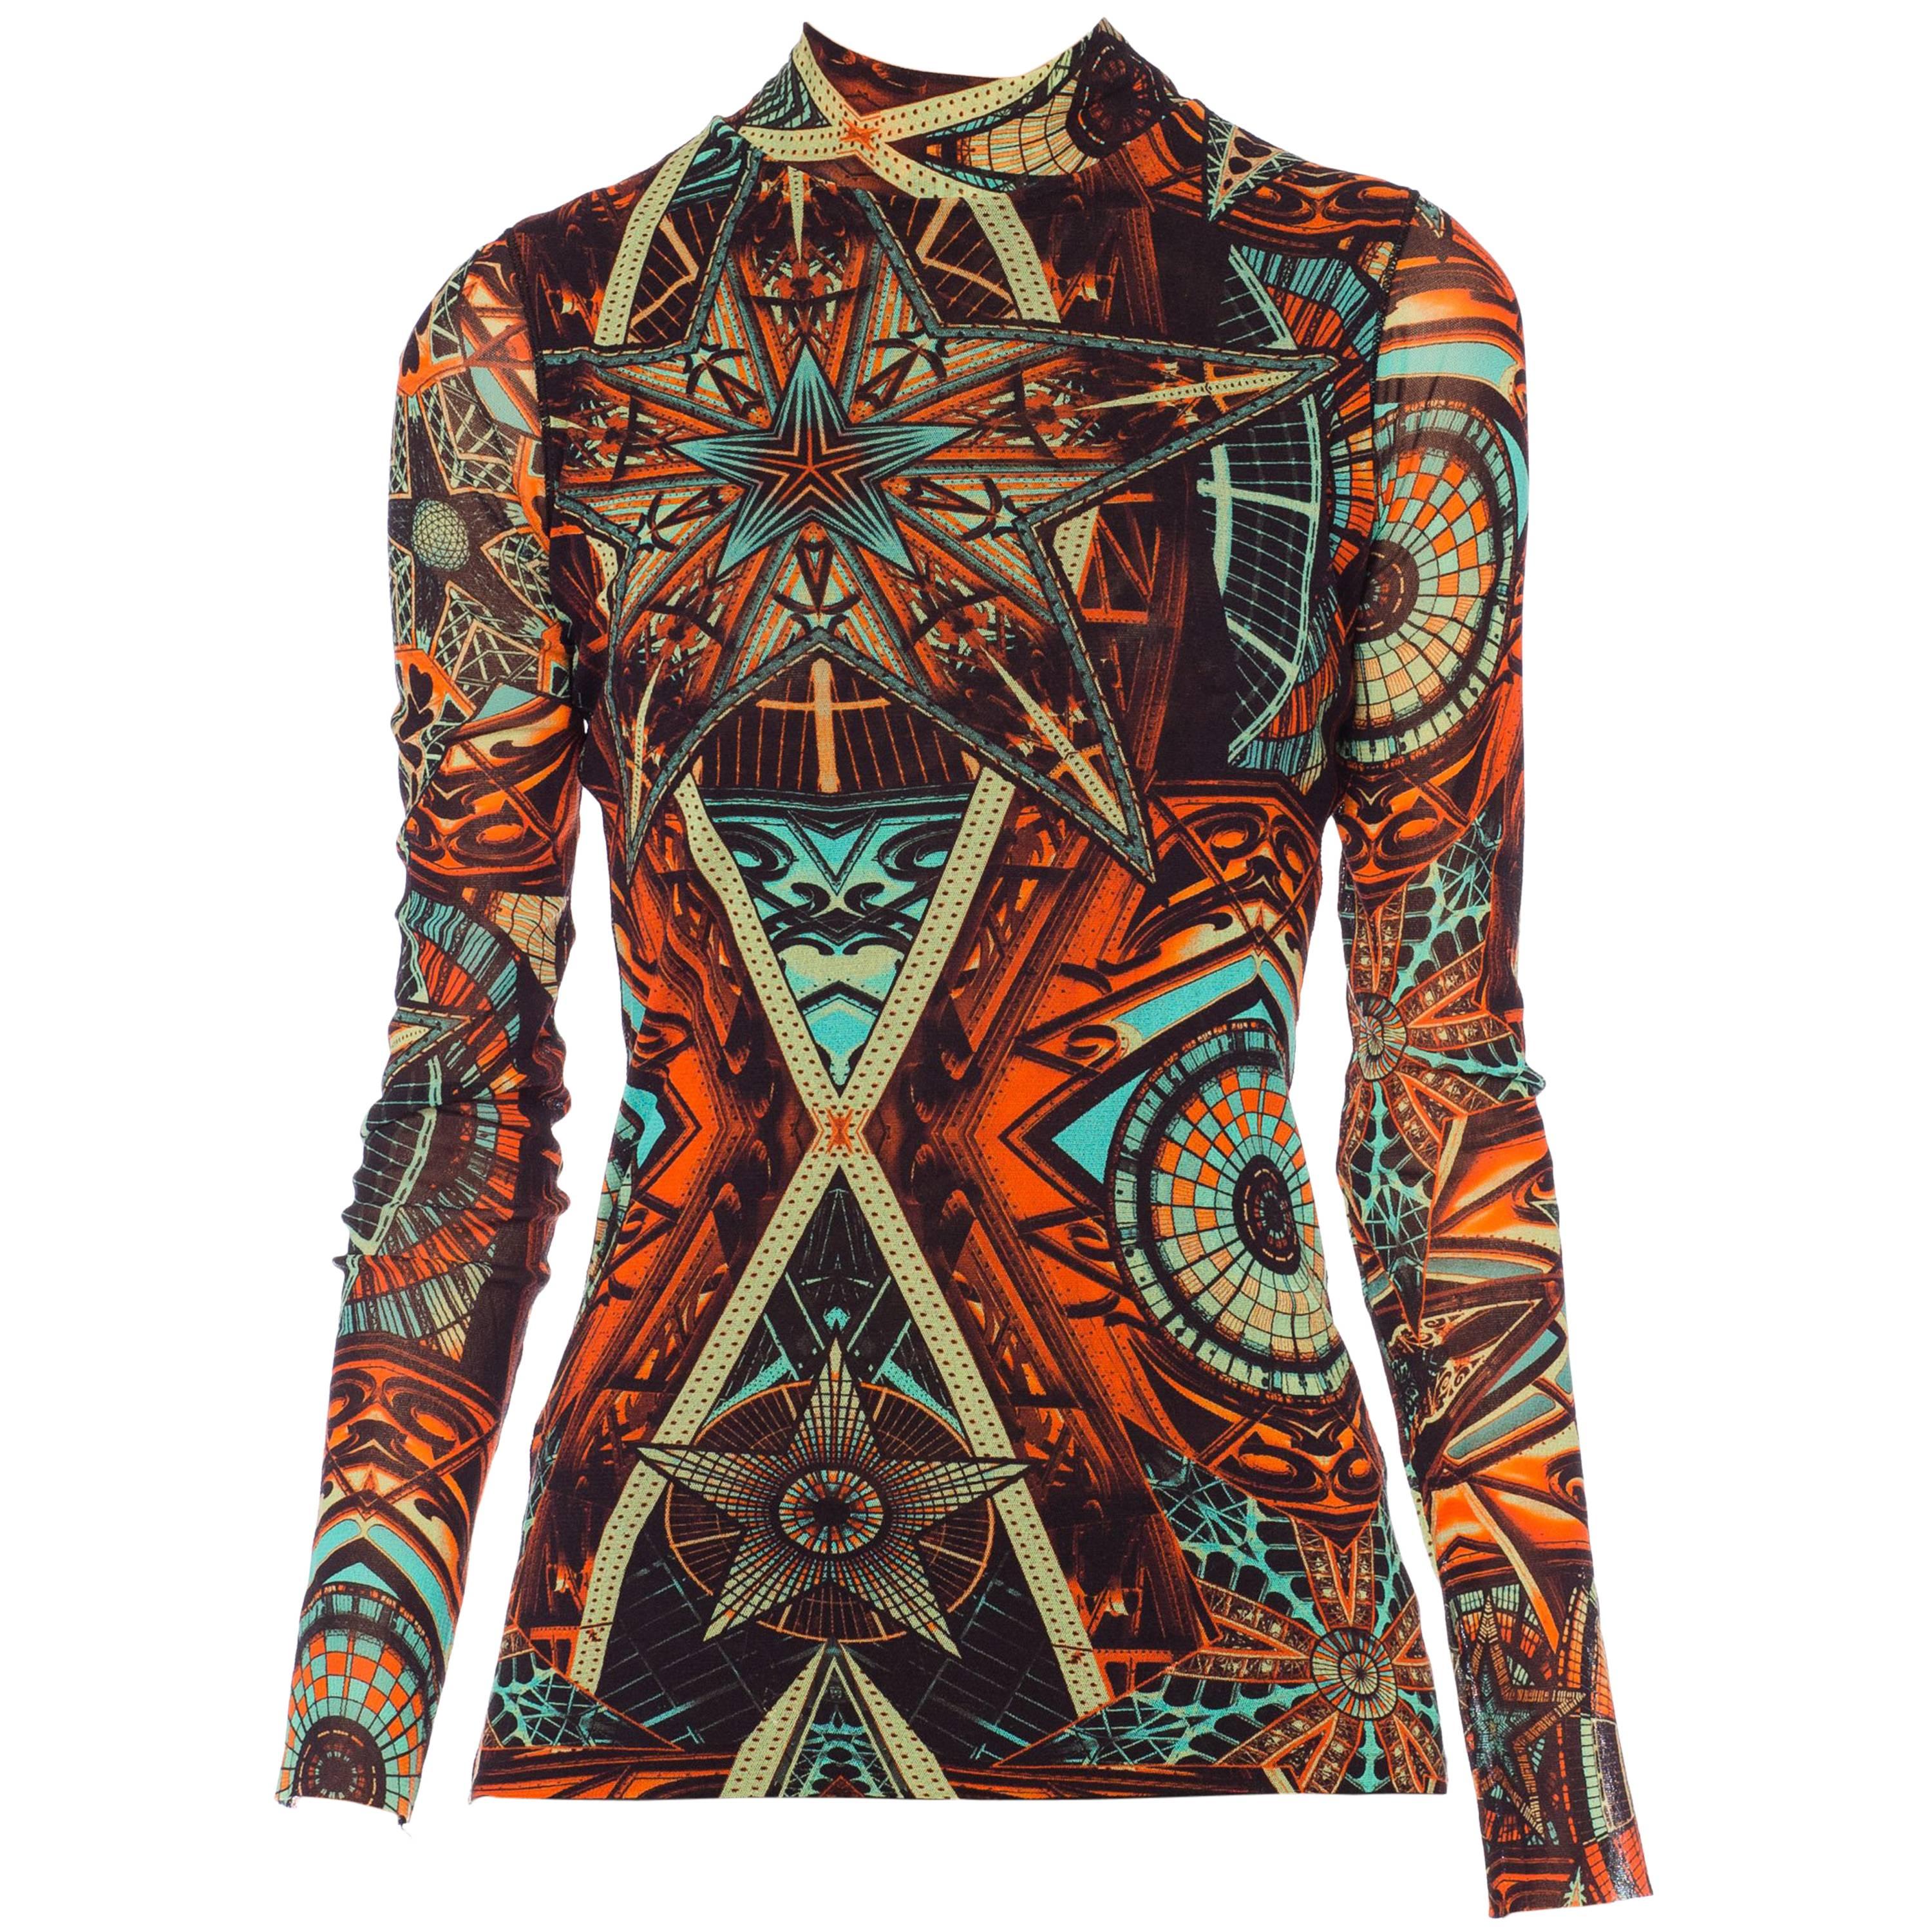 1990S JEAN PAUL GAULTIER Printed Poly/Lycra Mesh Top With Abstract Geometrics